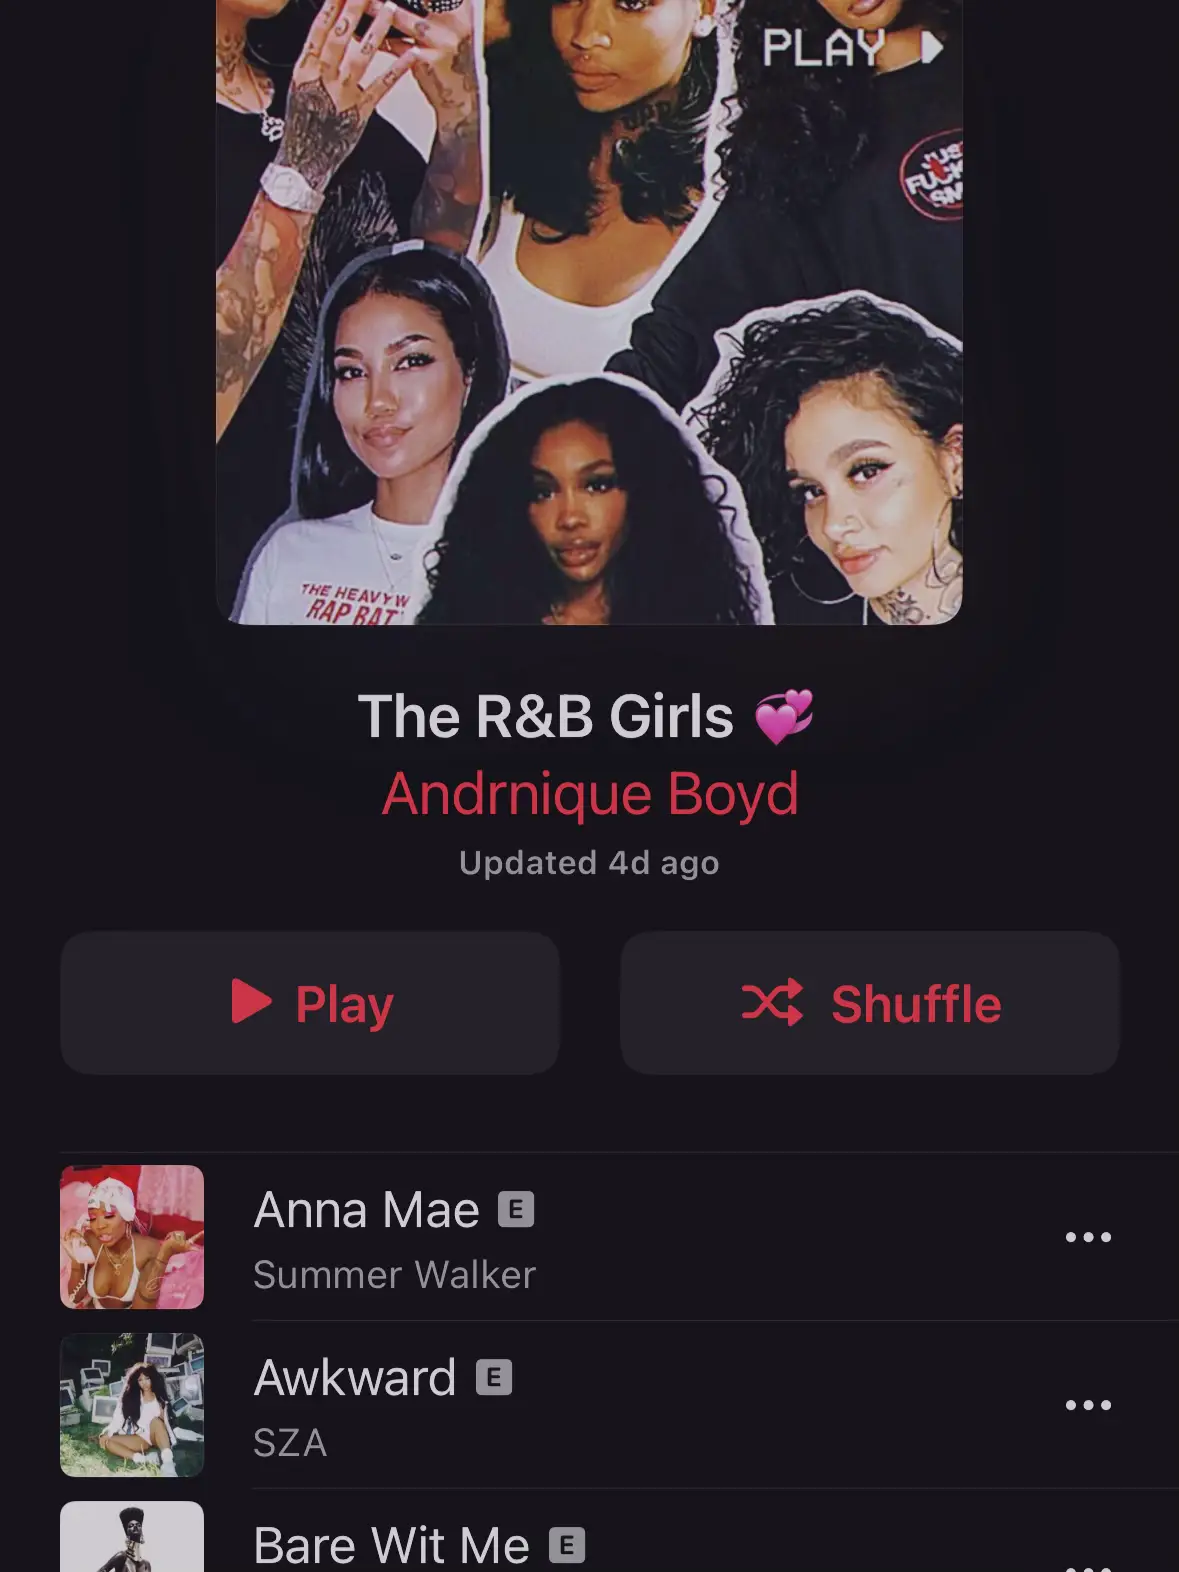  A playlist of music with the words "The R&B Girls" and "Andrnique Boyd